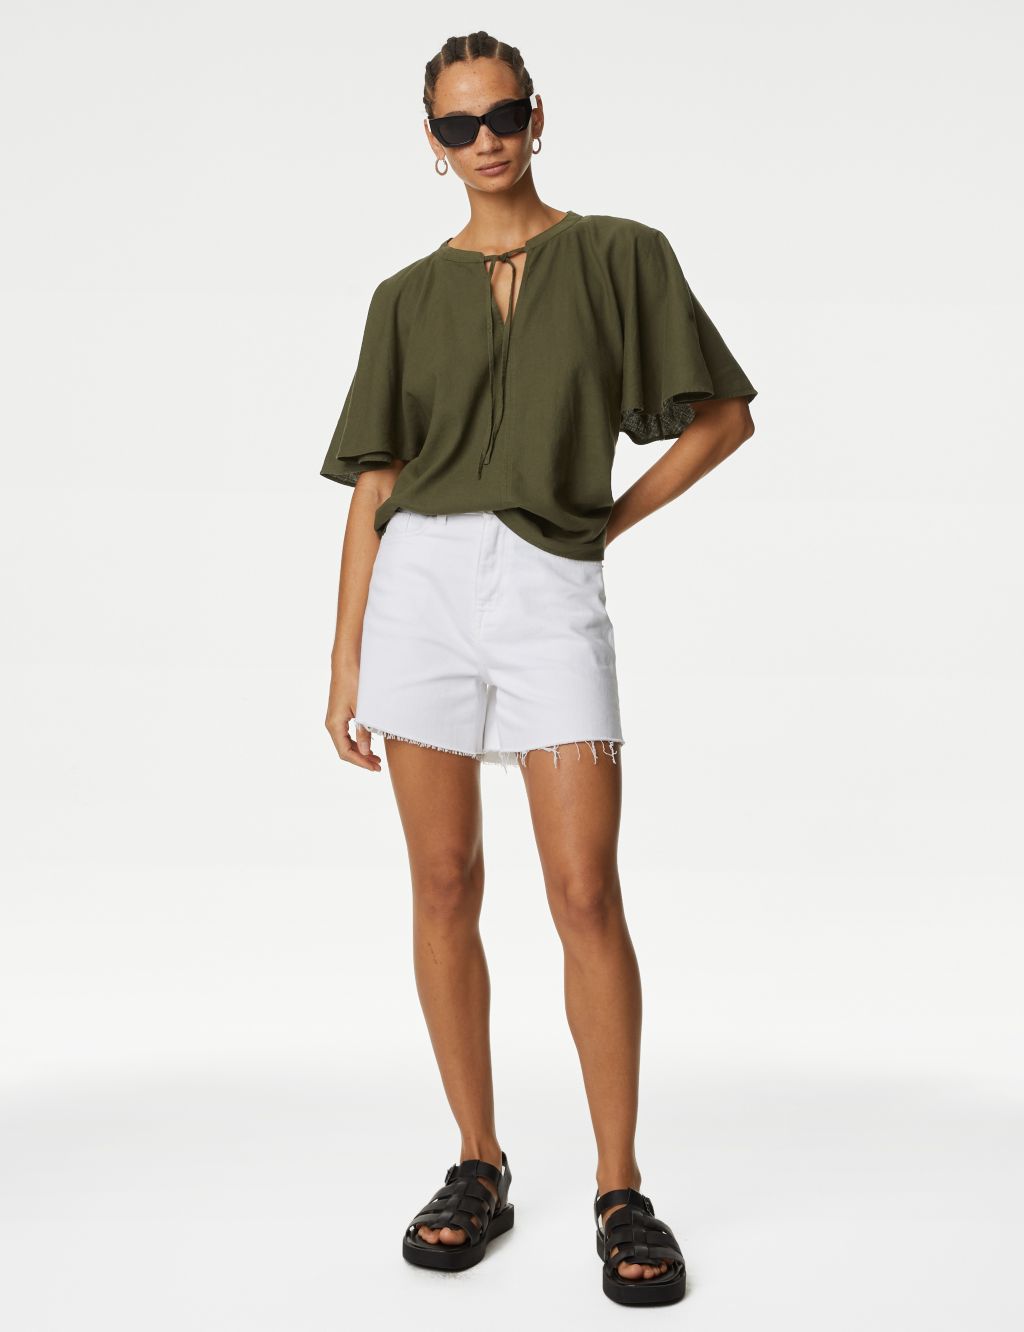 Page 3 - Women’s Shirts & Blouses | M&S